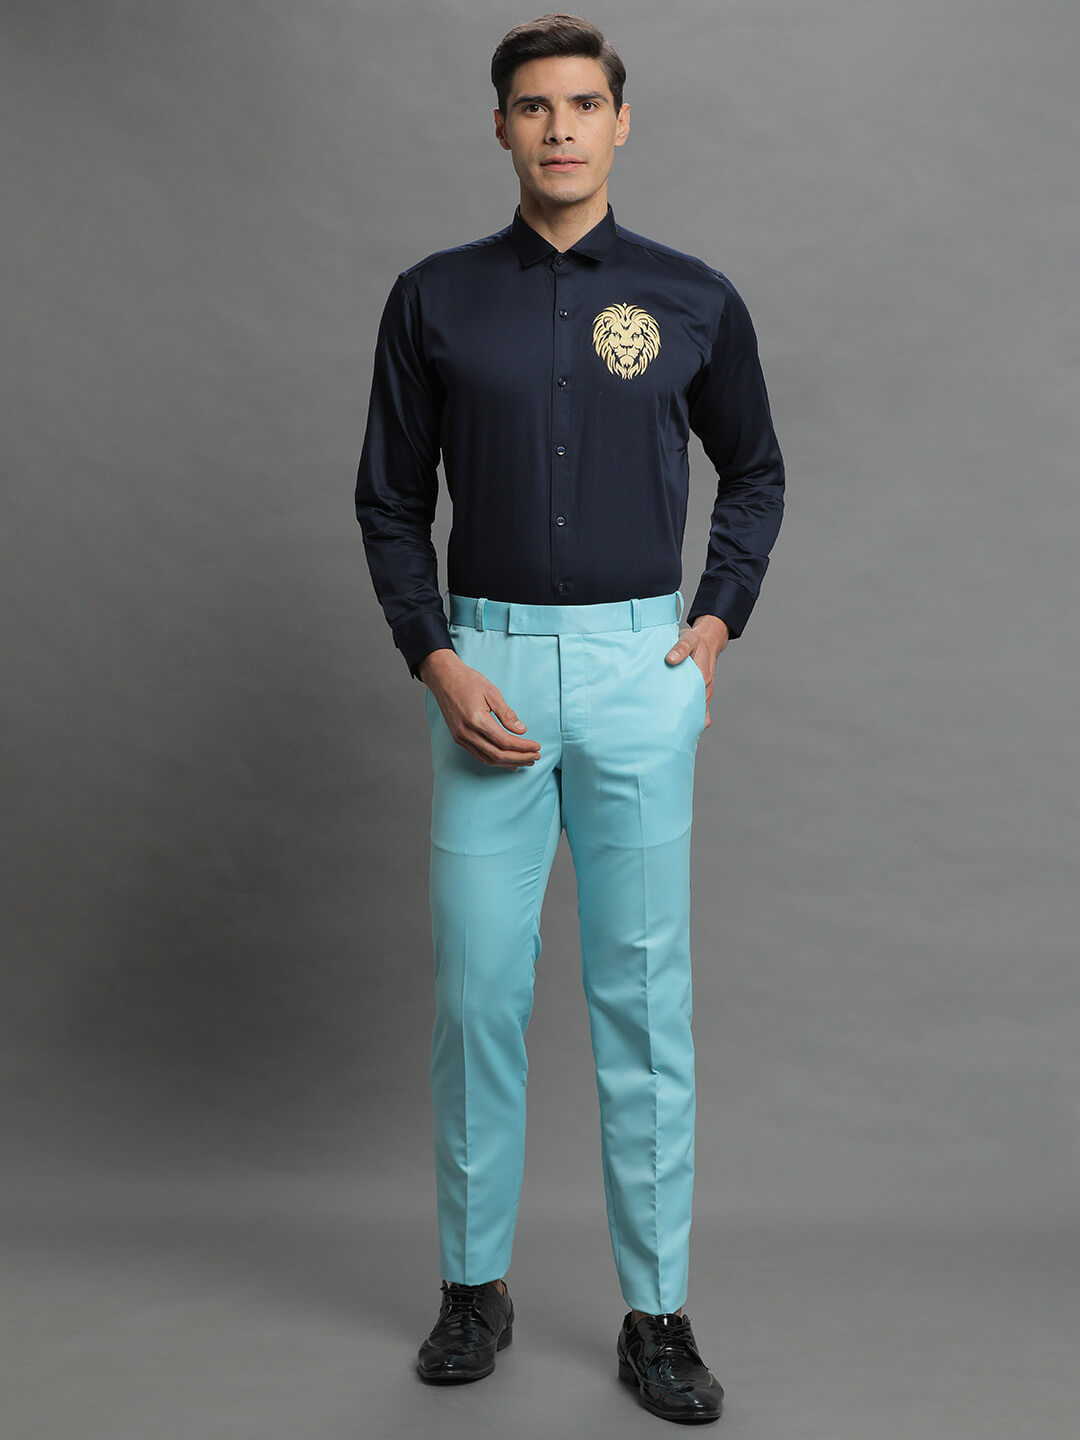 lion-embroidered-blue-shirt